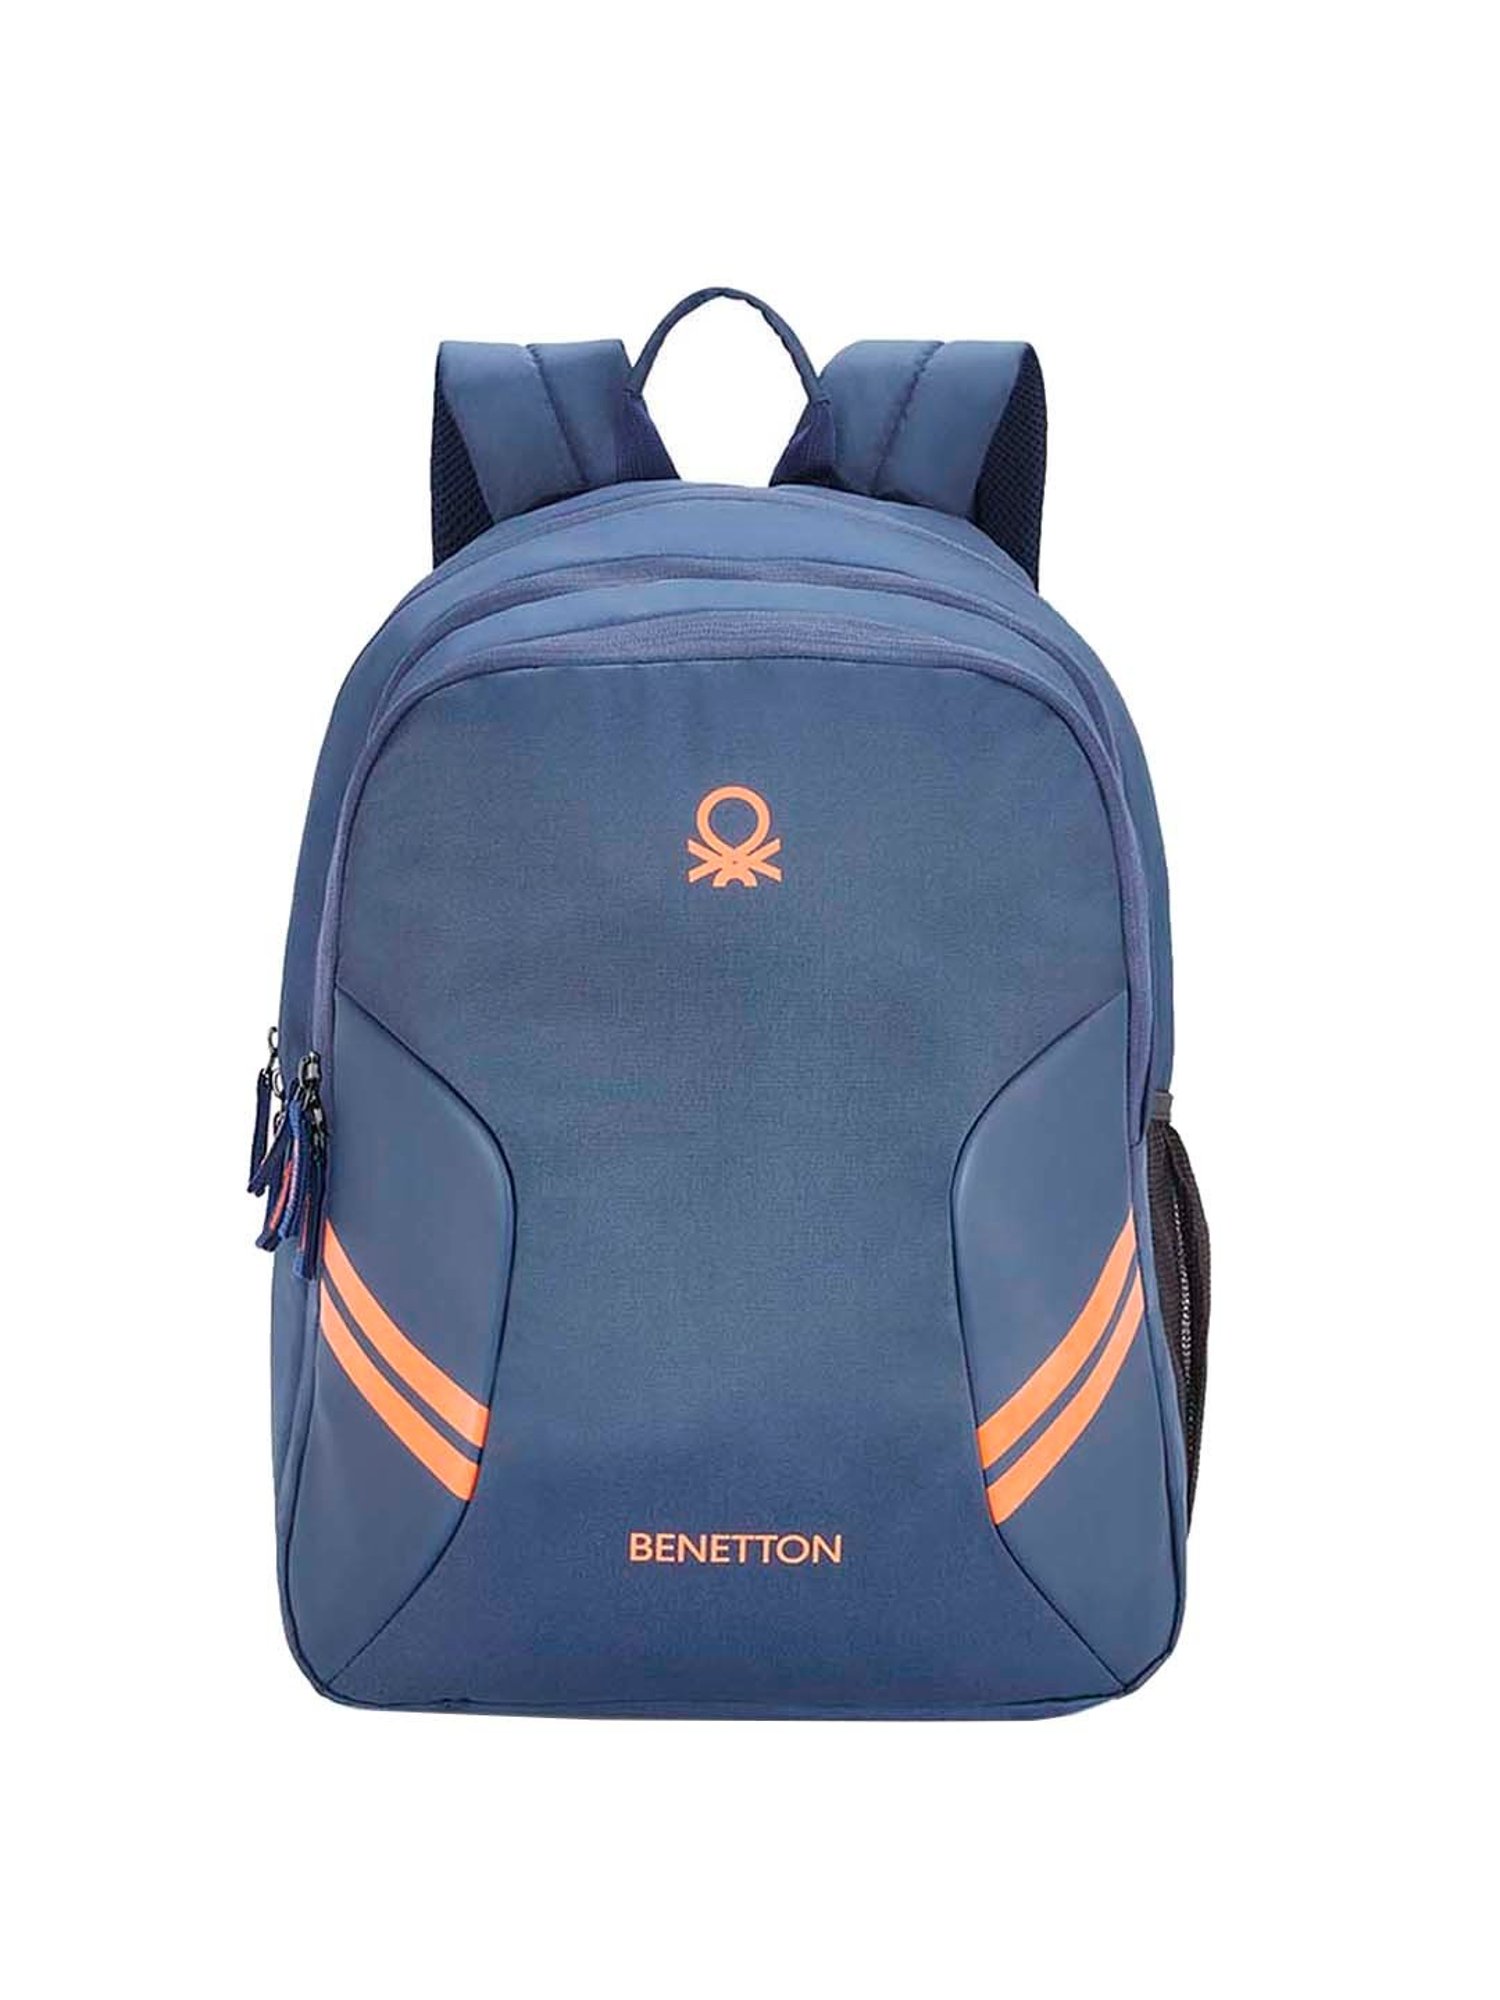 UCB Laptop Bag Convertible Backpack I United Colors of Benetton - BN1